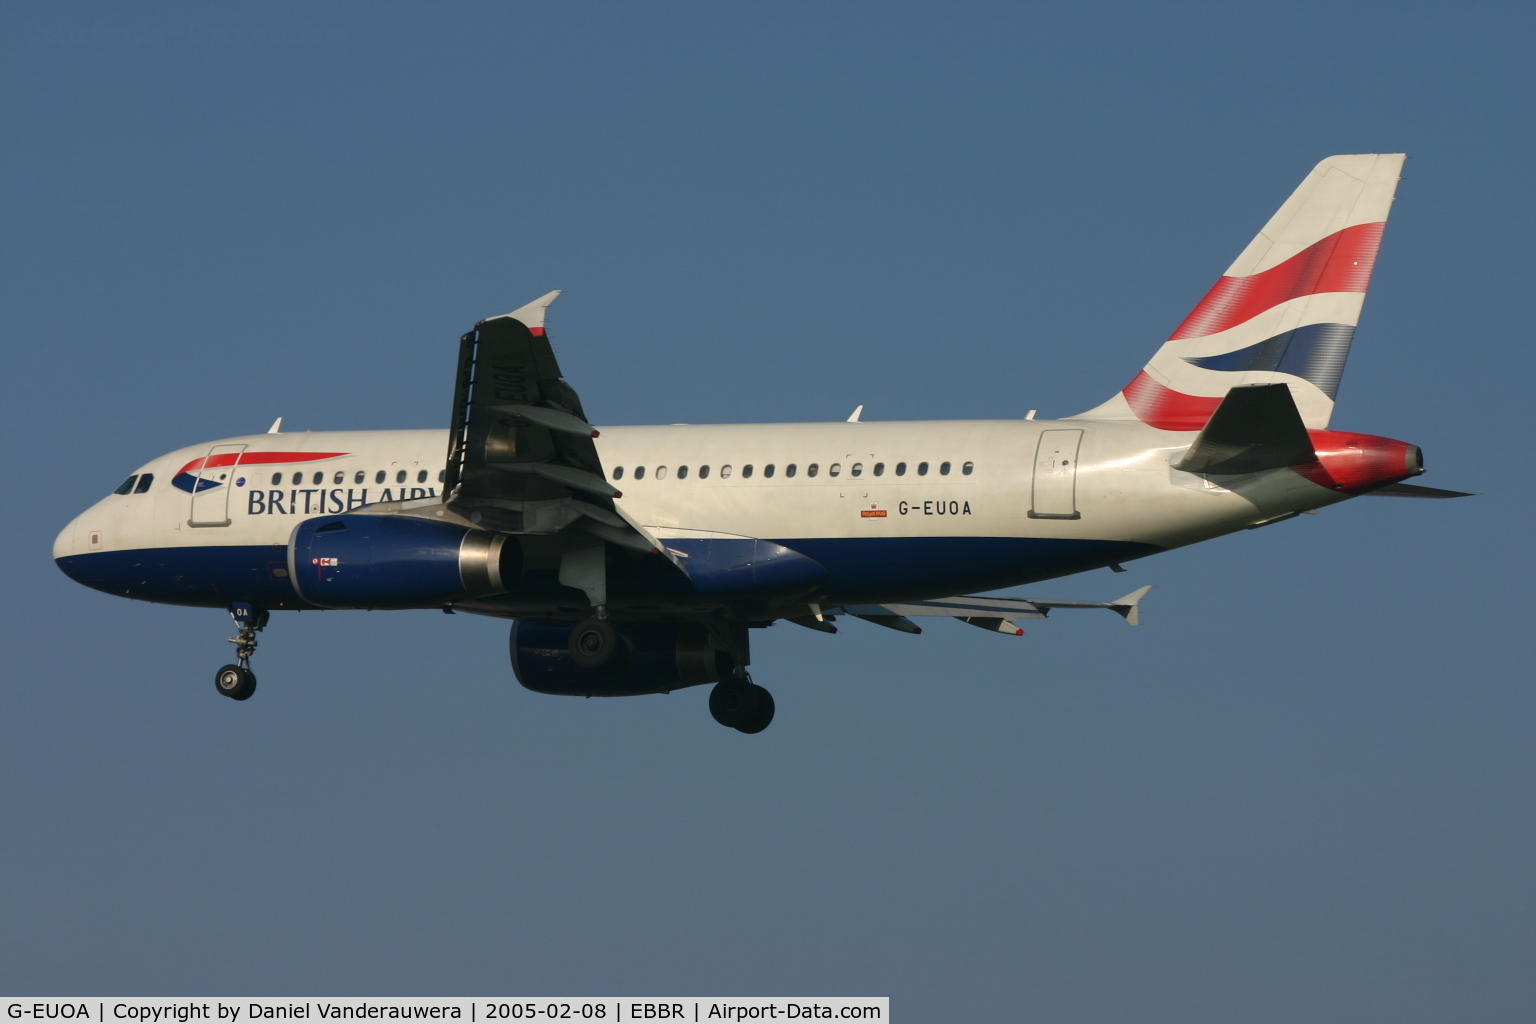 G-EUOA, 2001 Airbus A319-131 C/N 1513, arrival of flight BA392 to rwy 25L